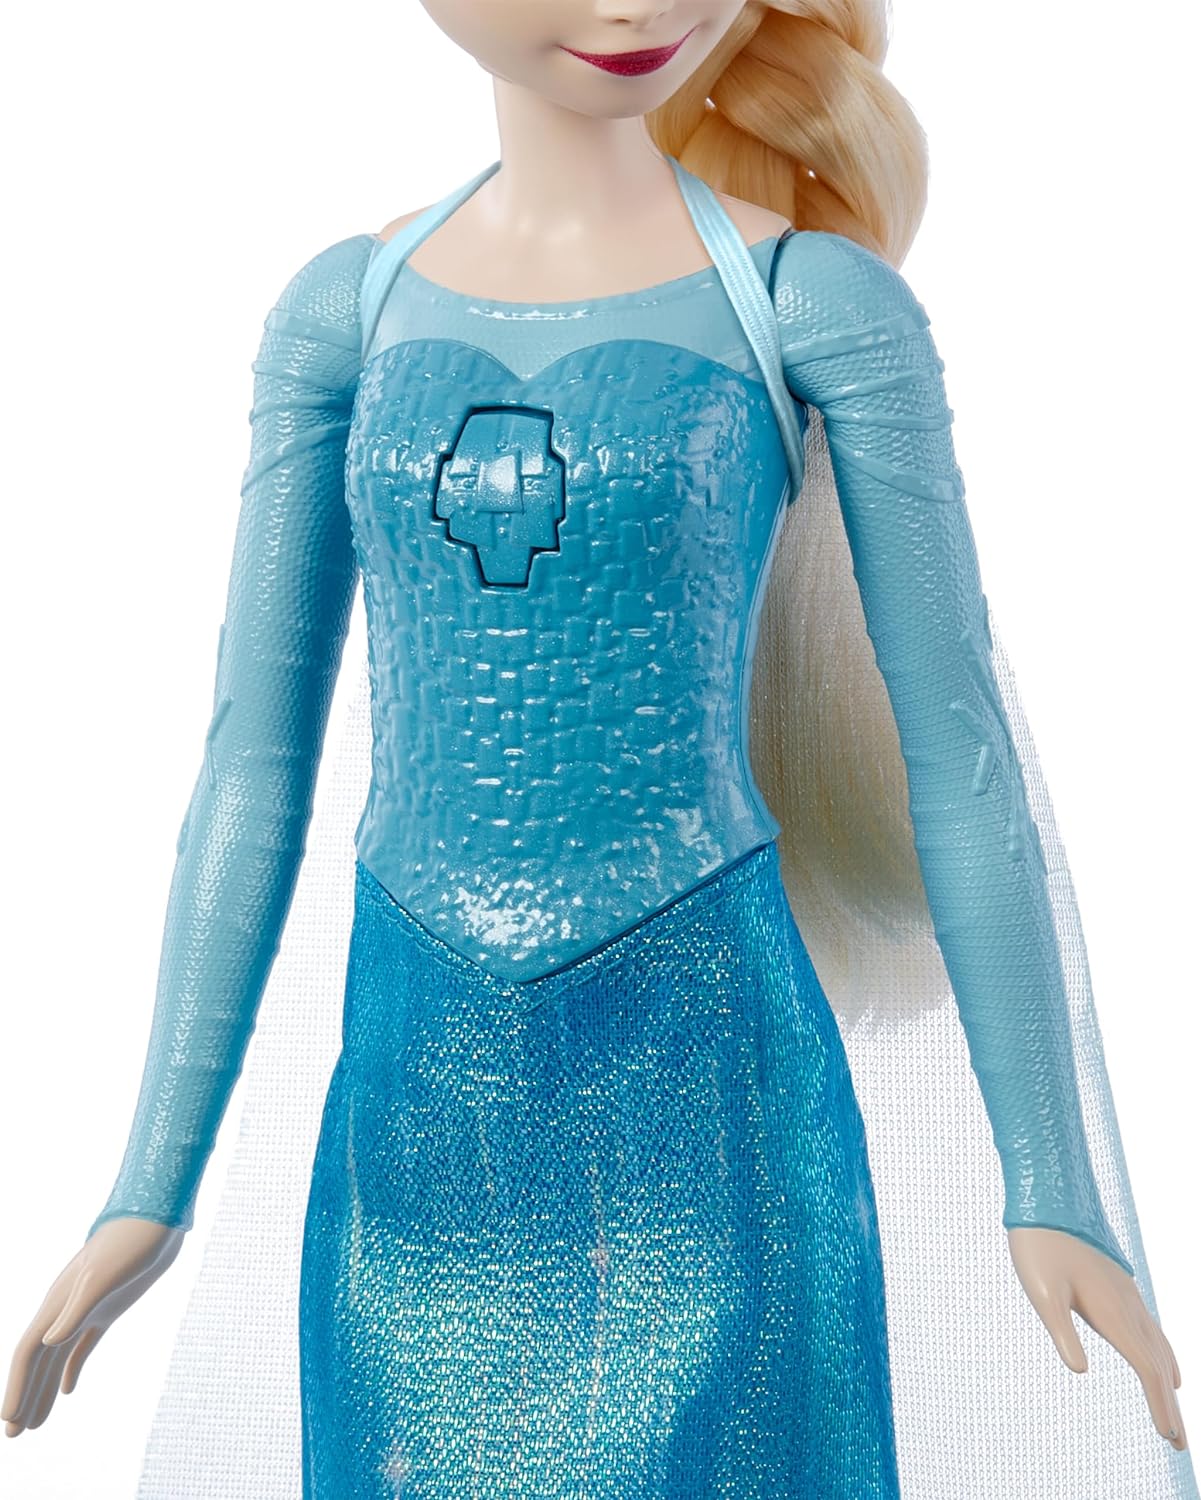 Read more about the article Singing Elsa Doll Review